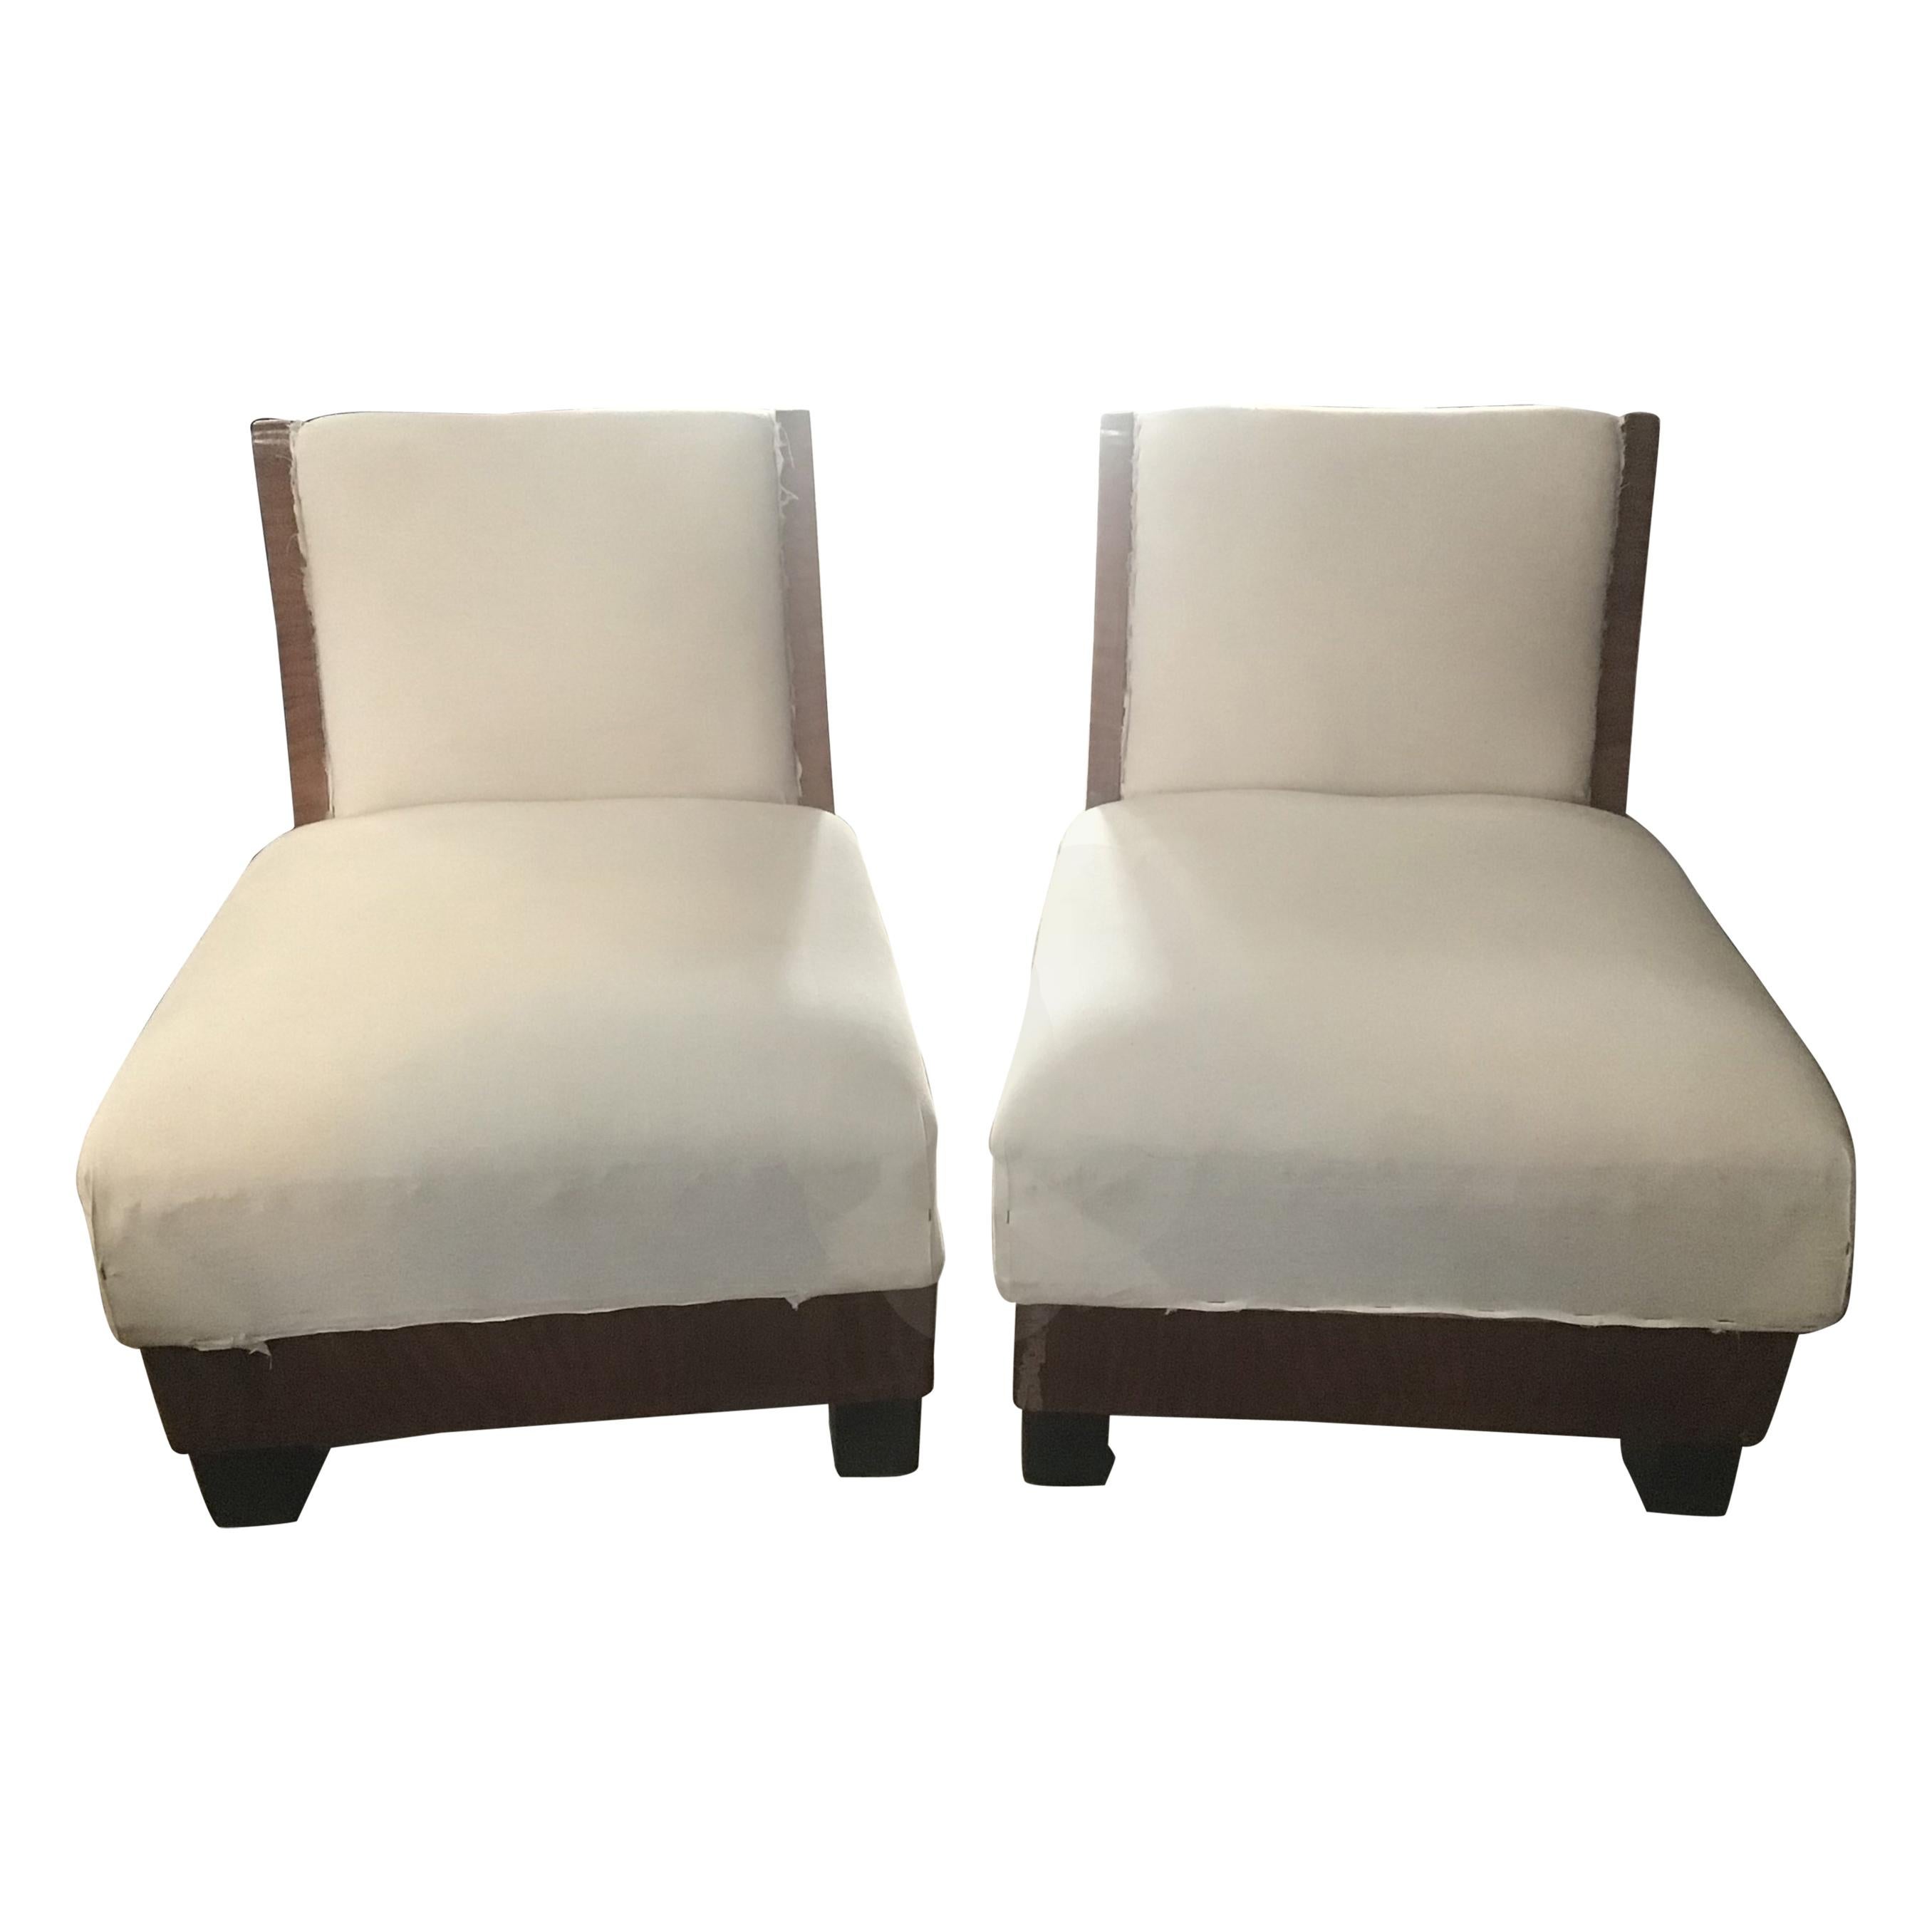 Pair of Art Deco Briar-Root Italian Armchairs from 1940s For Sale